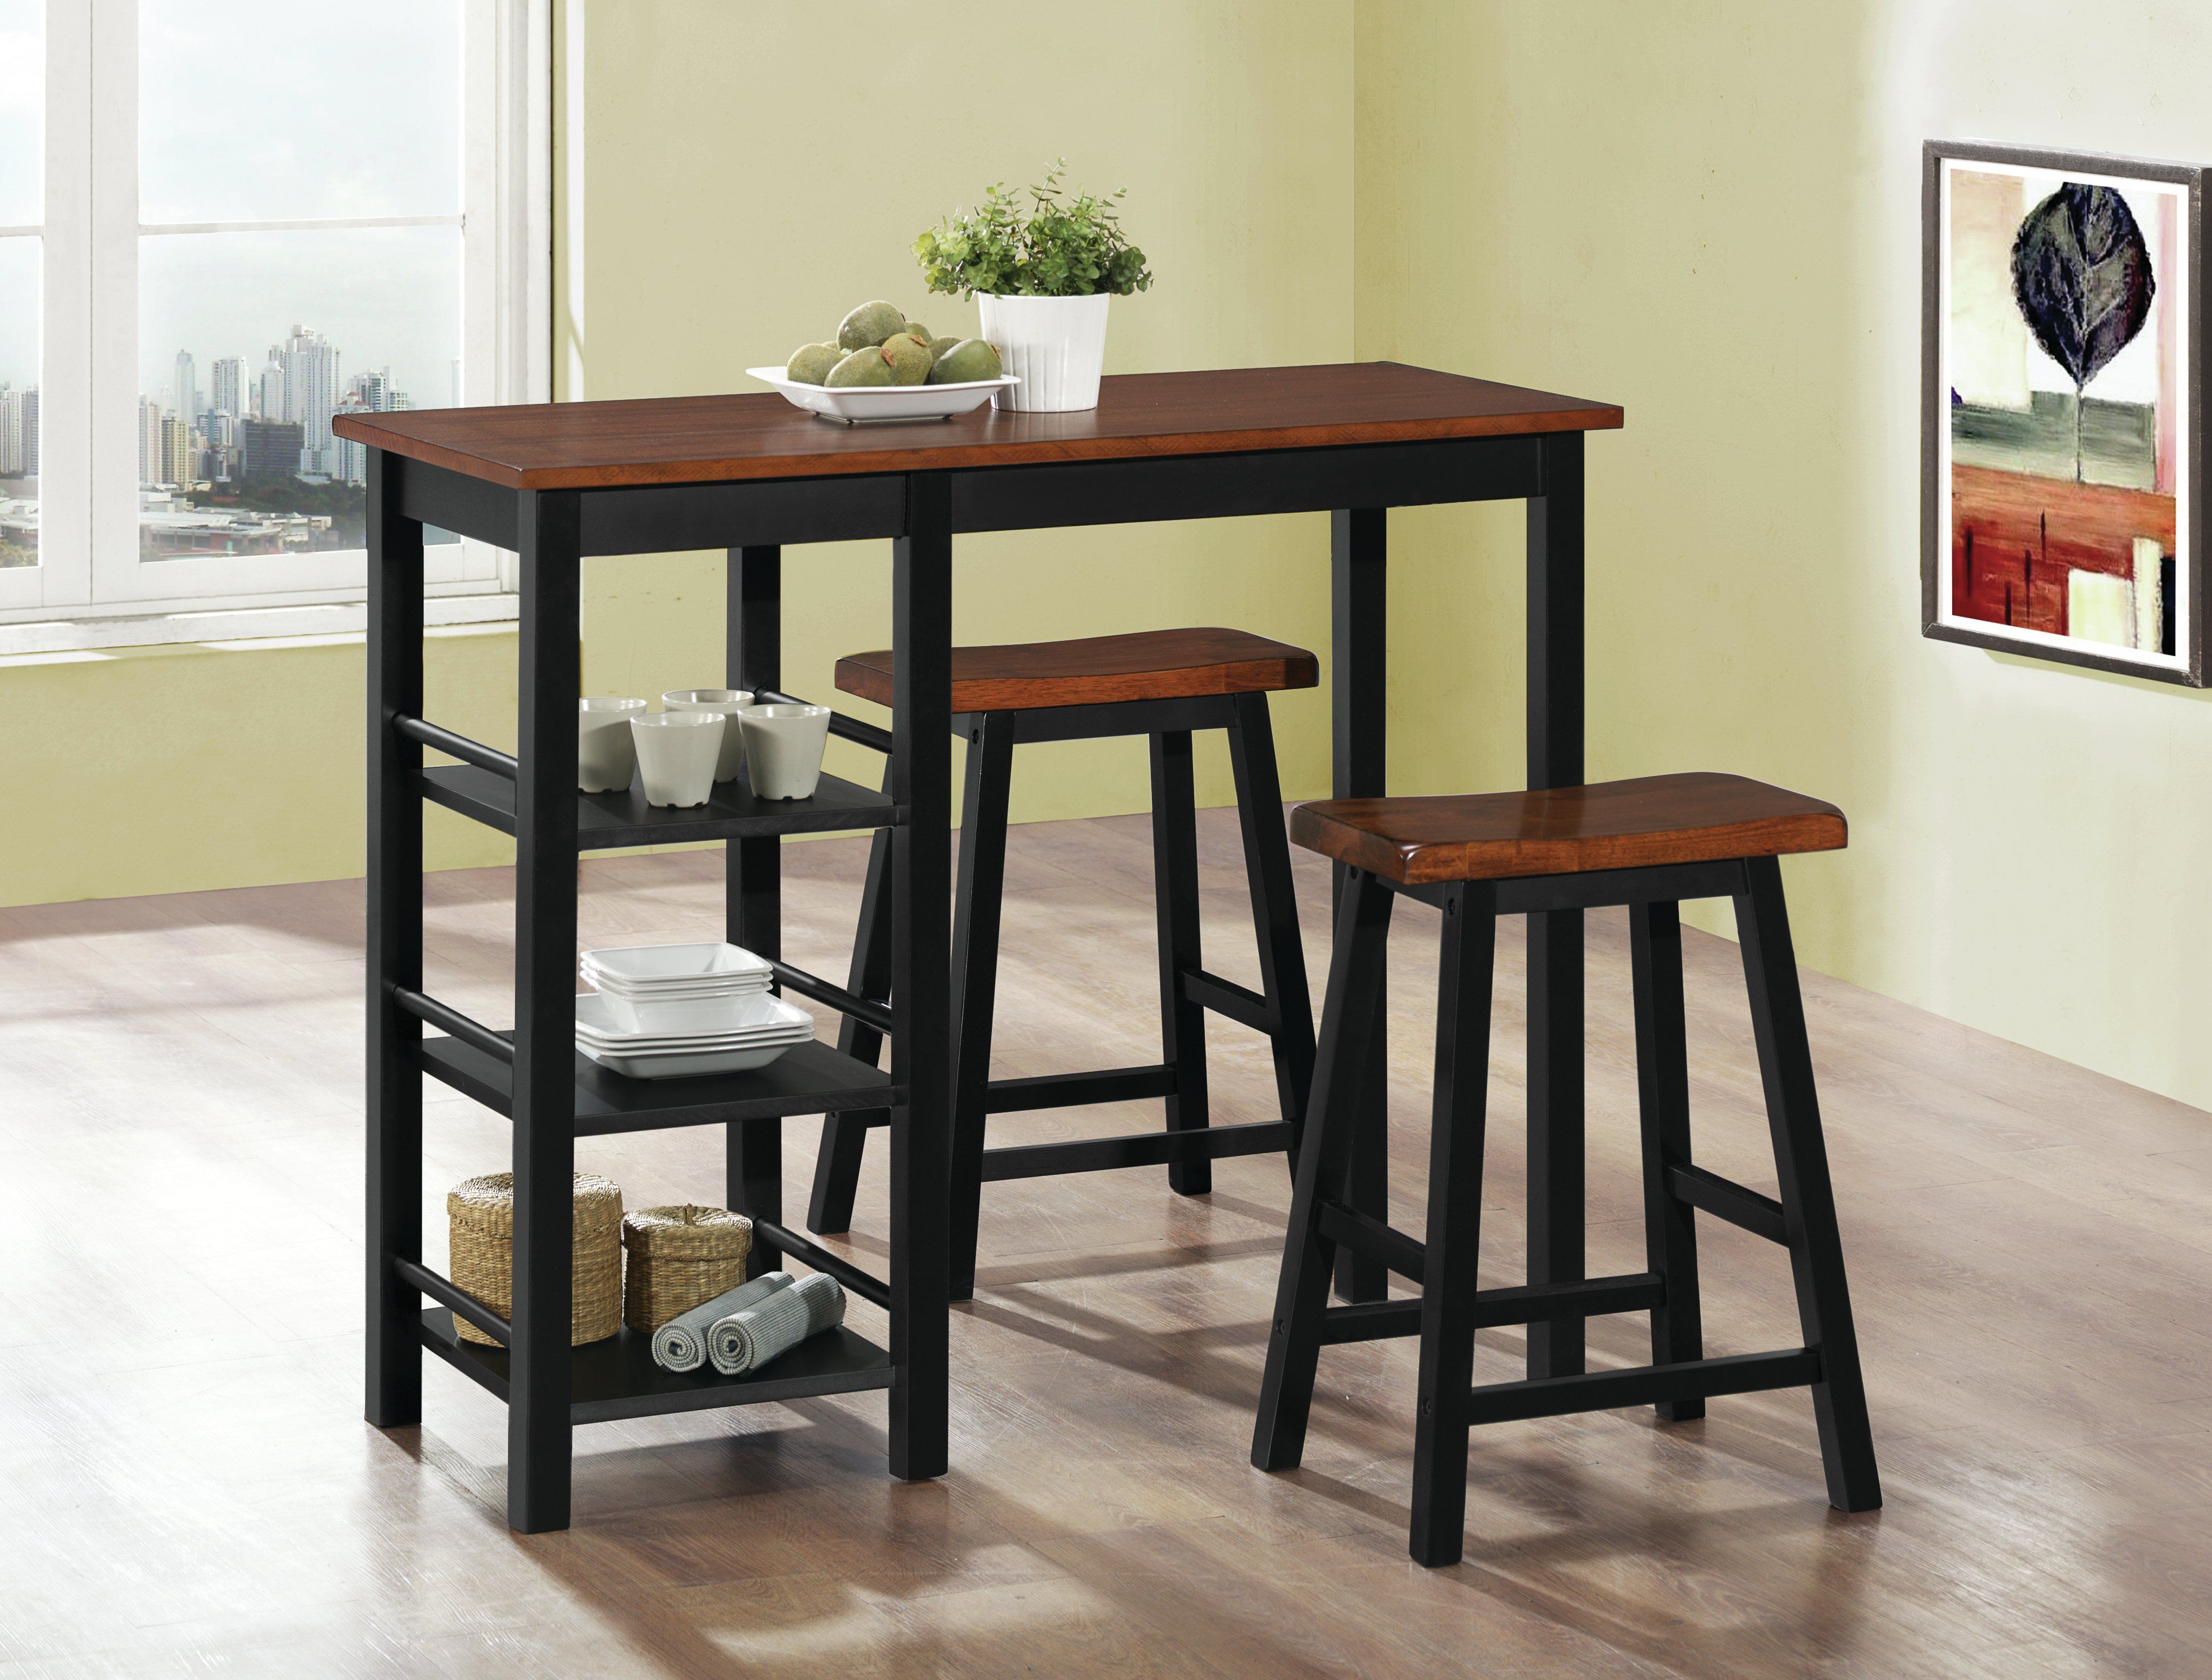 Berrios 3 Piece Counter Height Dining Set Pertaining To Best And Newest Bearden 3 Piece Dining Sets (View 19 of 20)